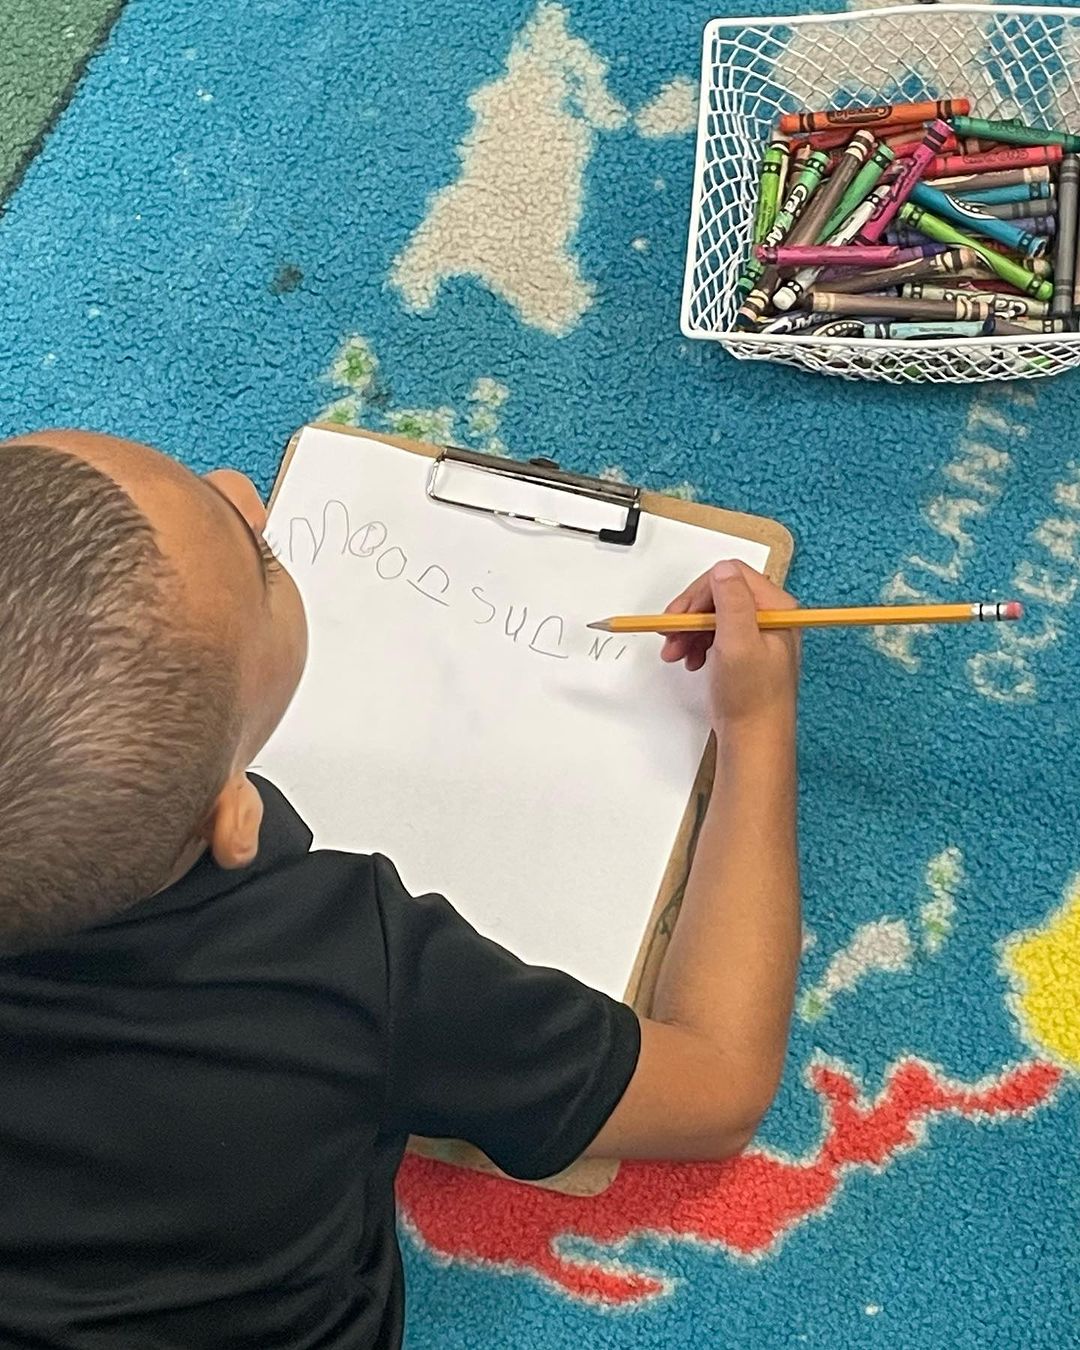 a boy is writing on the floor with a clipboard